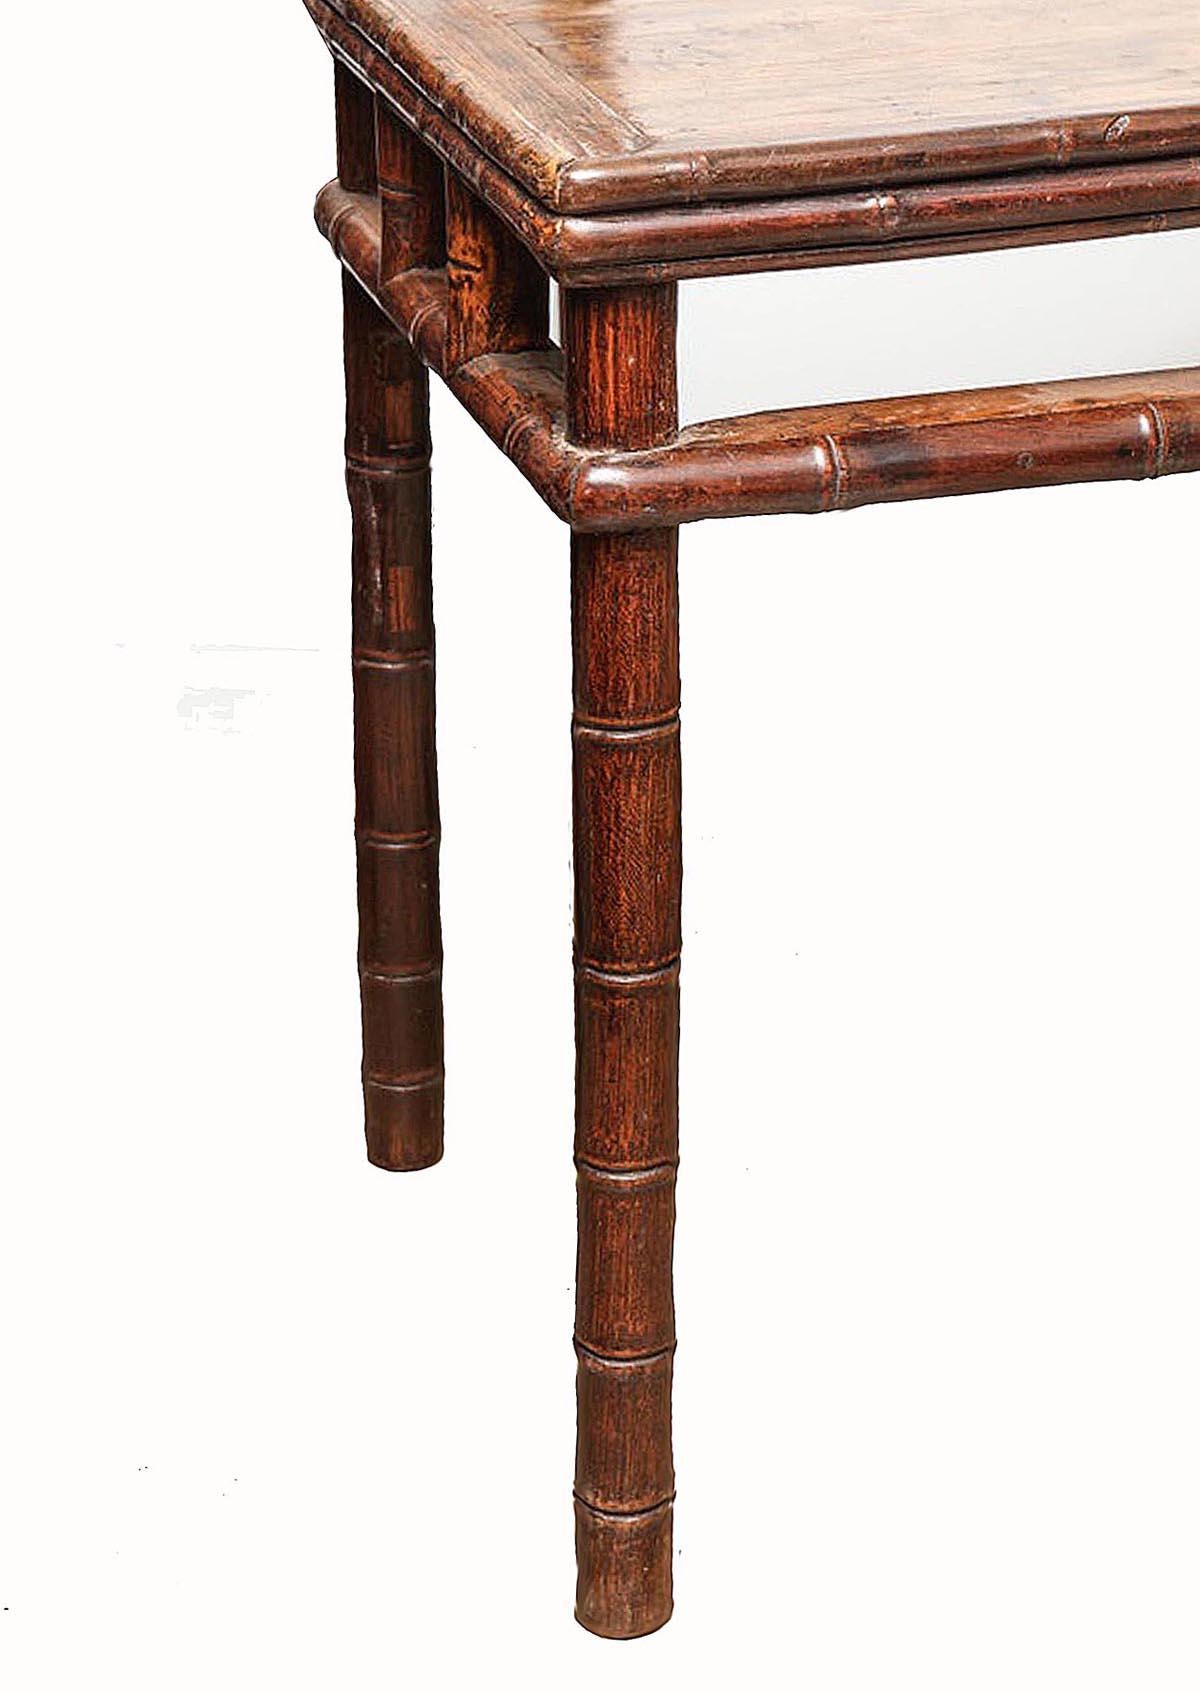 Hand-Carved 18th Century Elmwood Console Table, Sianxi, China